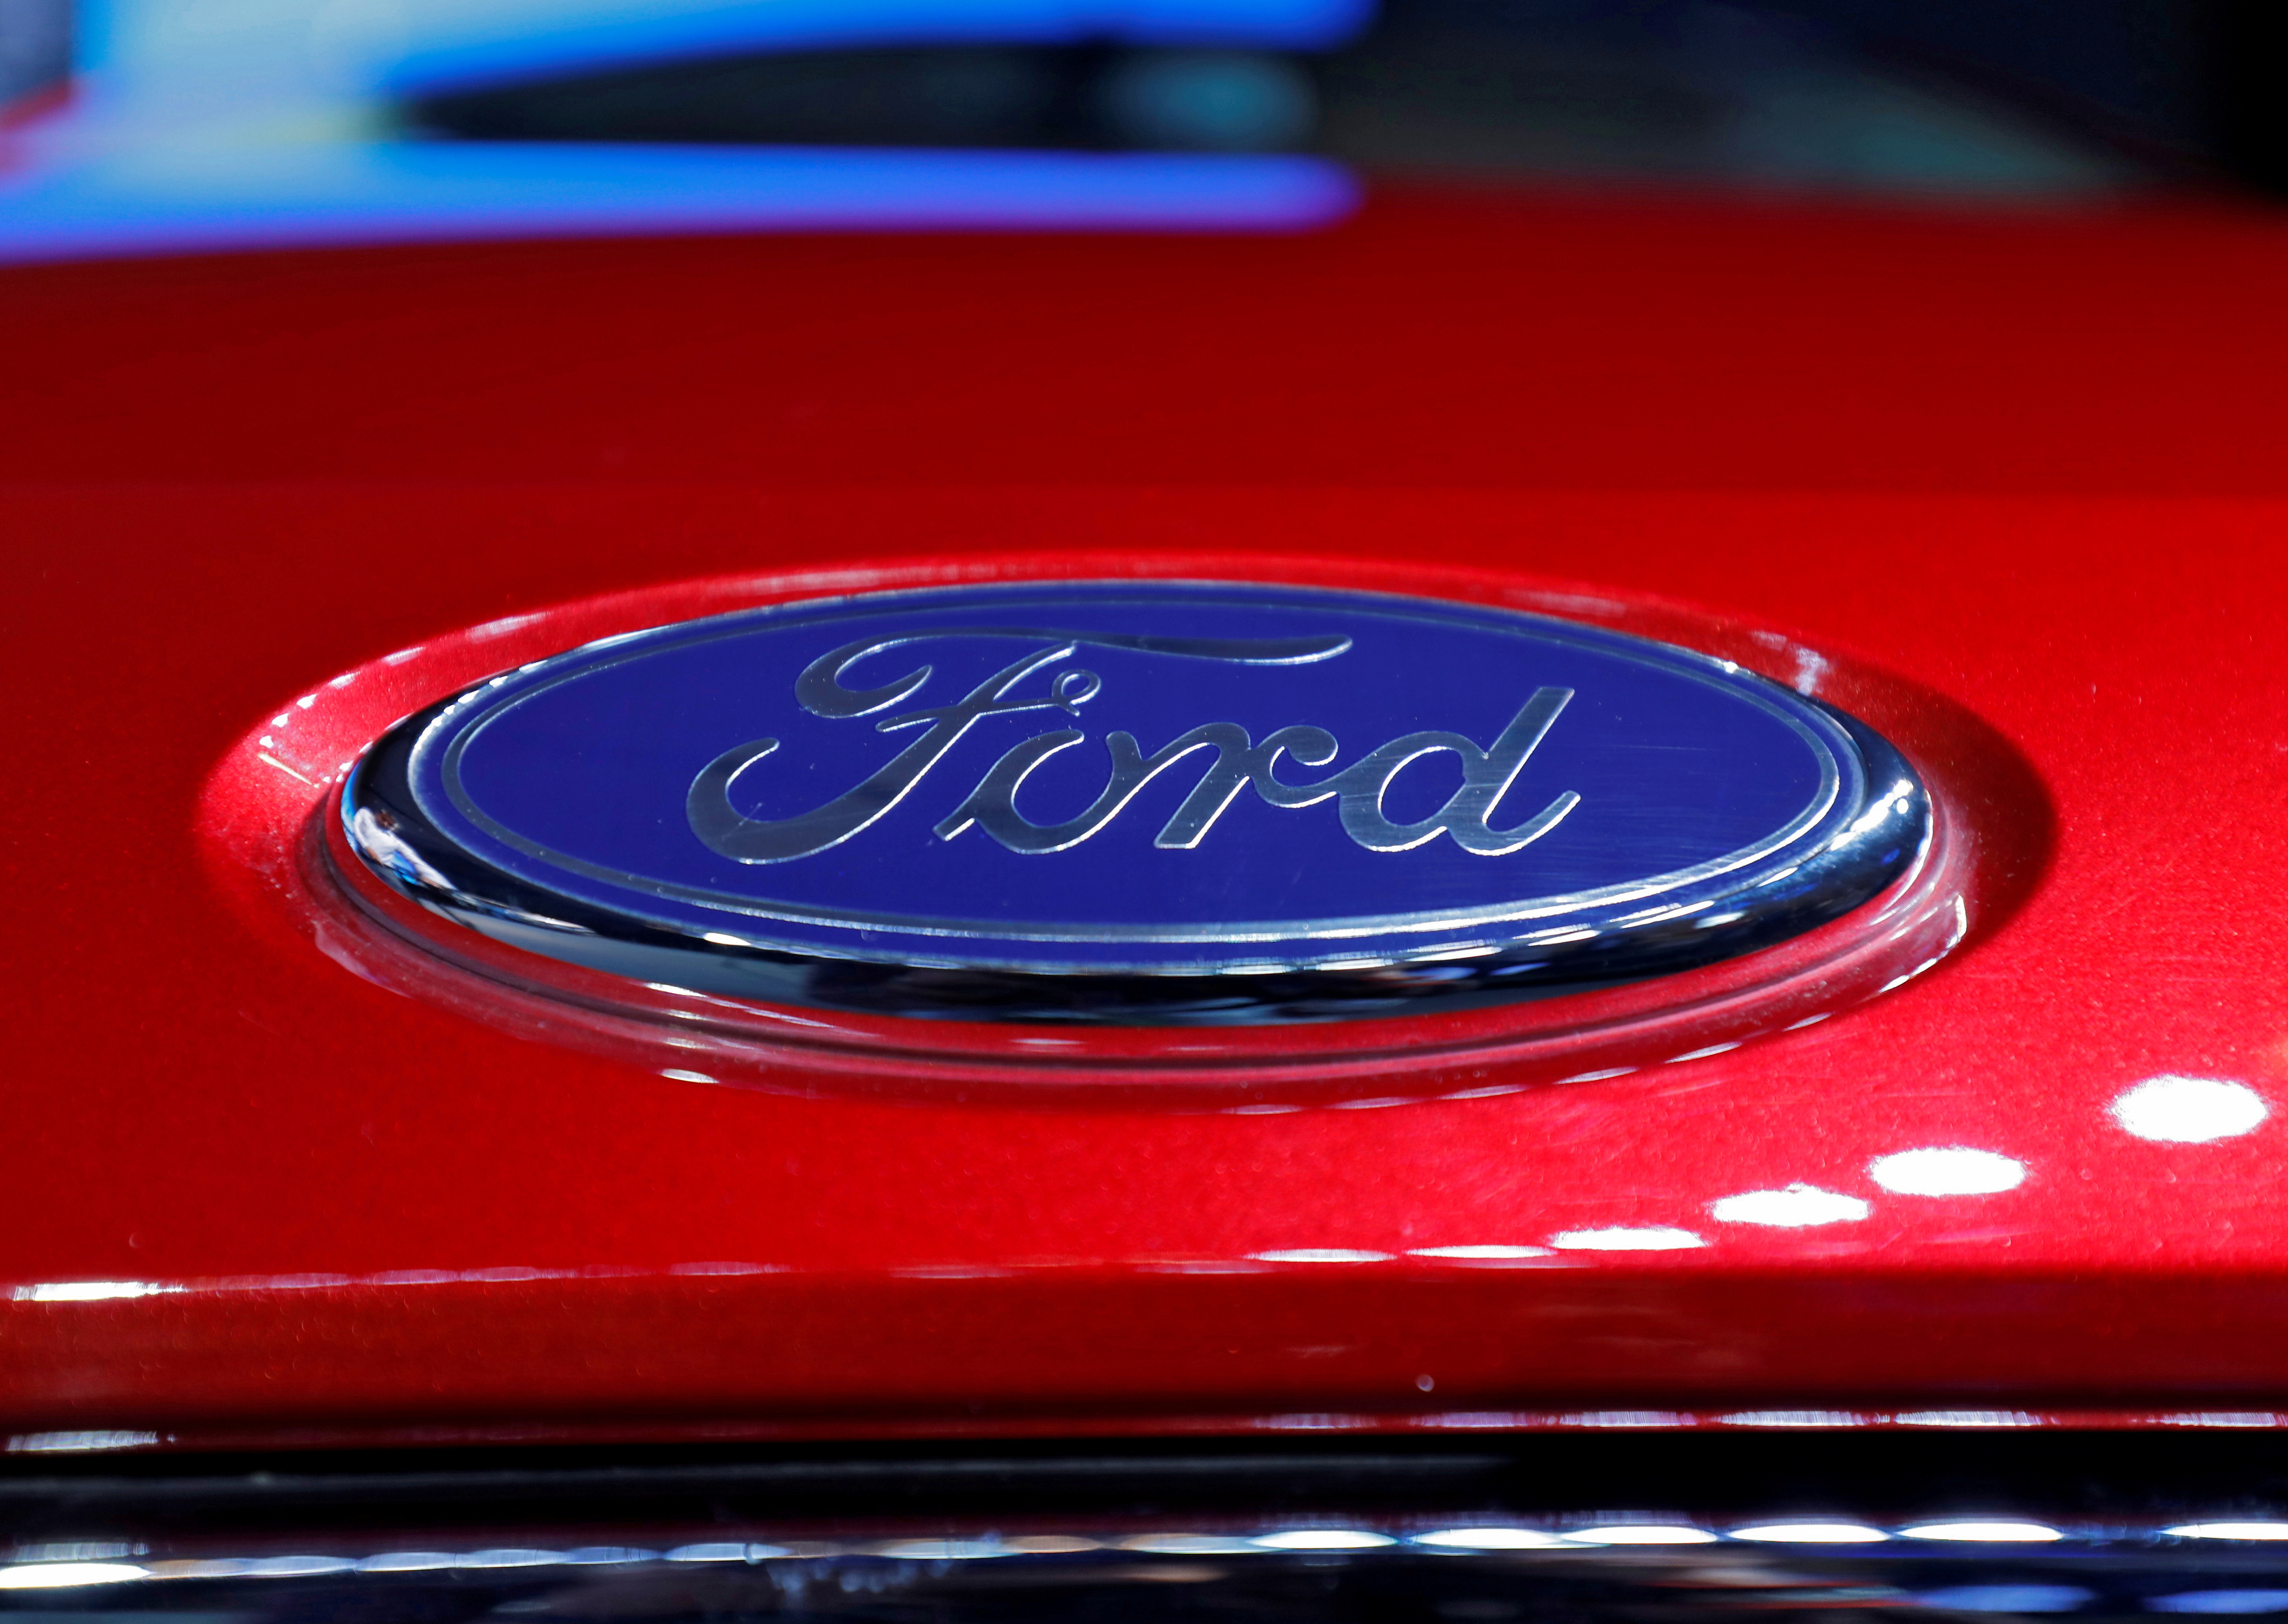 The logo is seen on the bonnet of a new Ford Aspire car during its launch in New Delhi